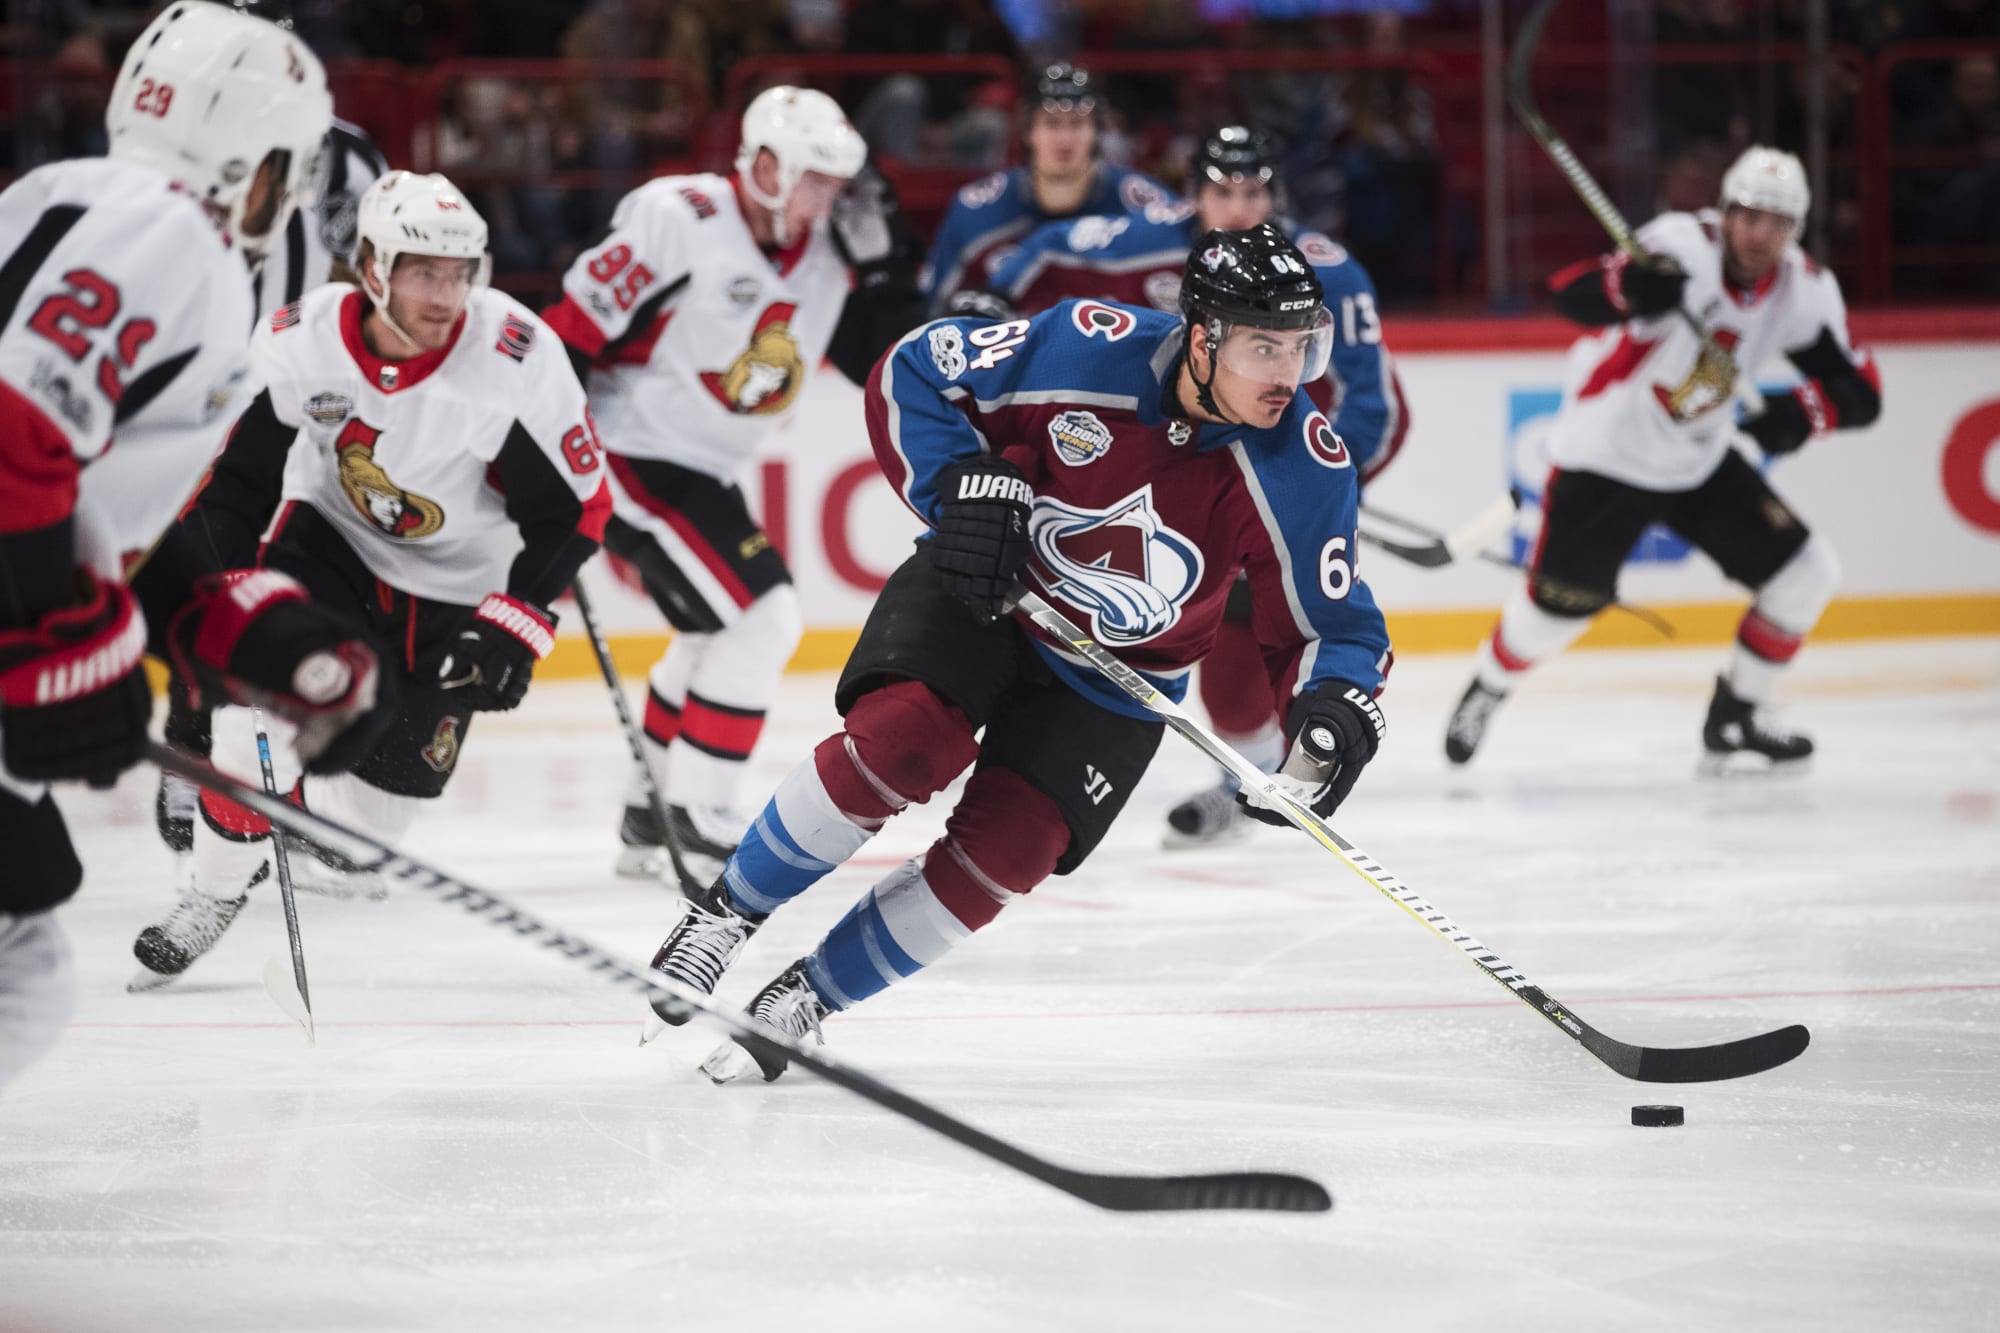 6. Avalanche's gamble on Nail Yakupov pays off - wide 9